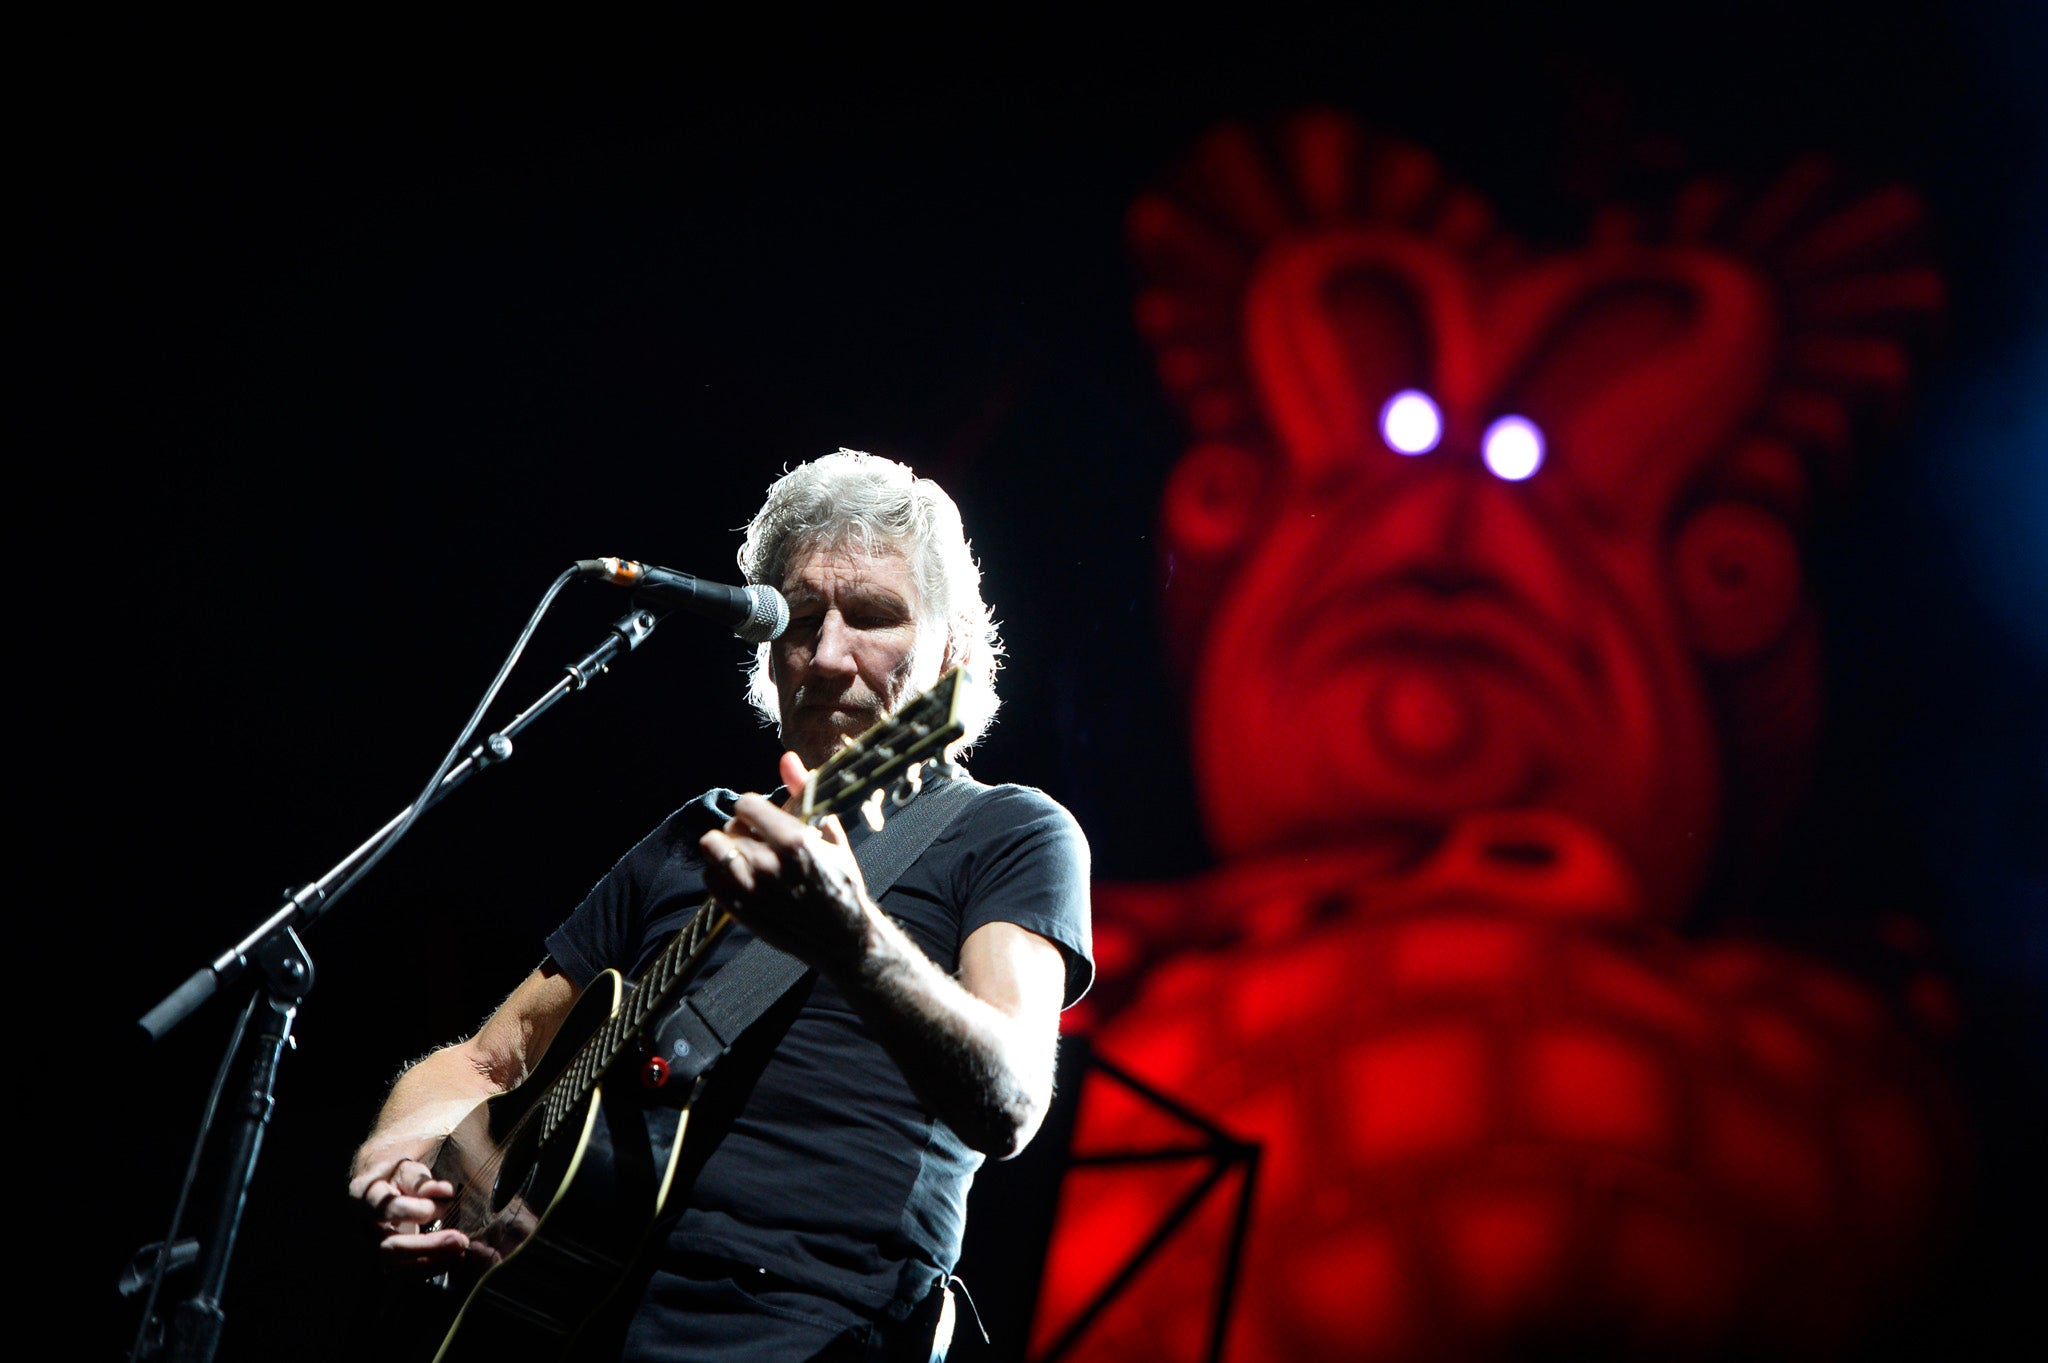 Roger Waters, performing here during his 'The Wall' tour, drew 'parallels' between Israel-Palestine conflict and 1930s and 40s Germany